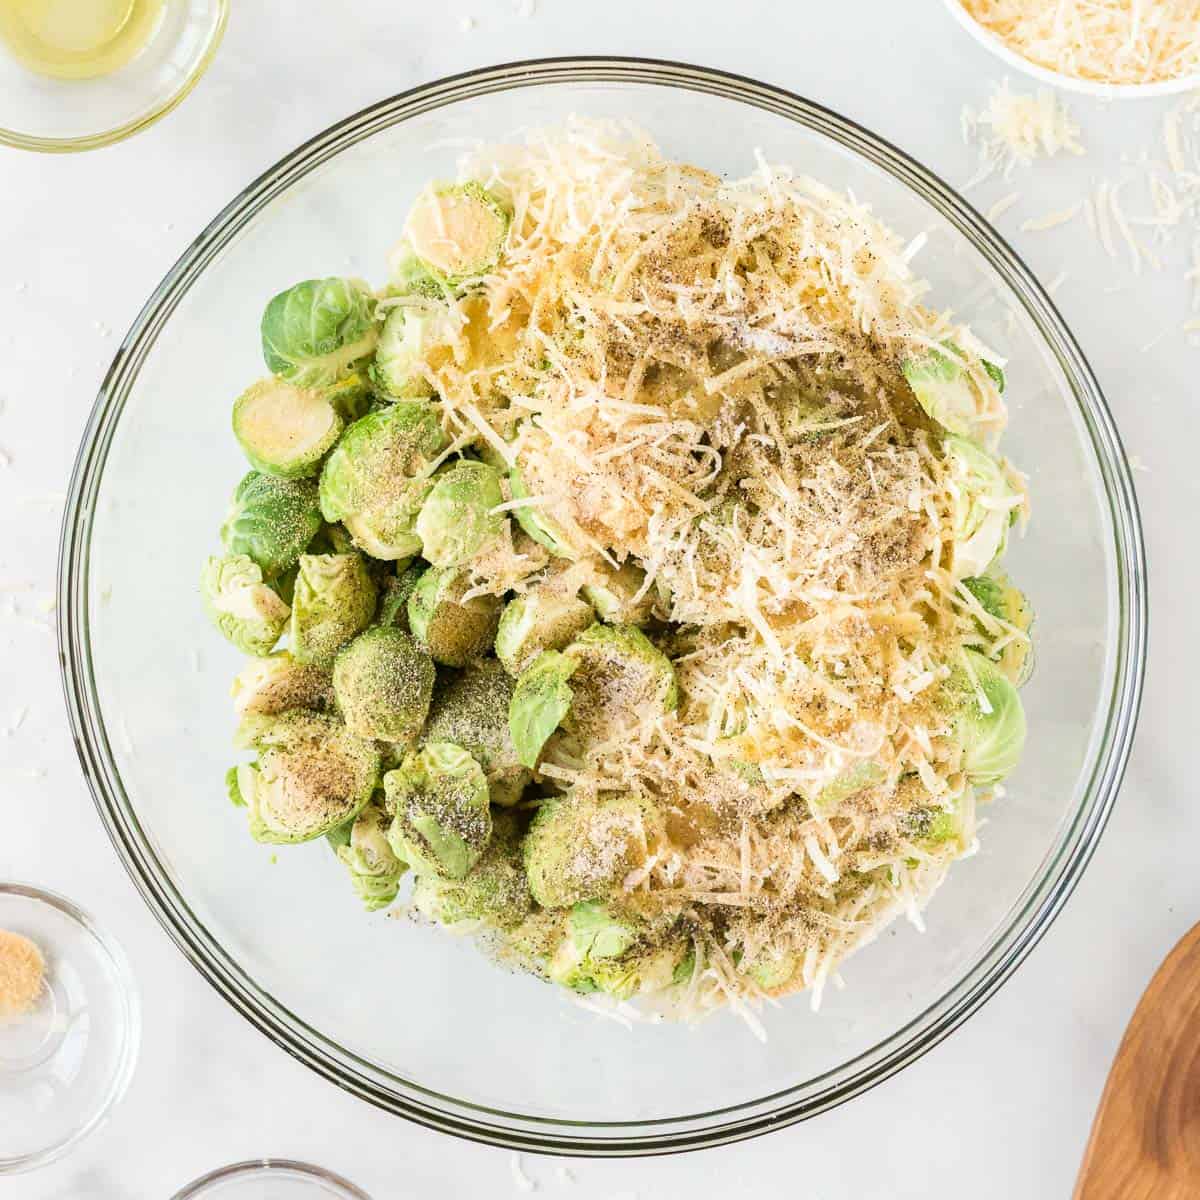 cheese and spices on the brussels sprouts